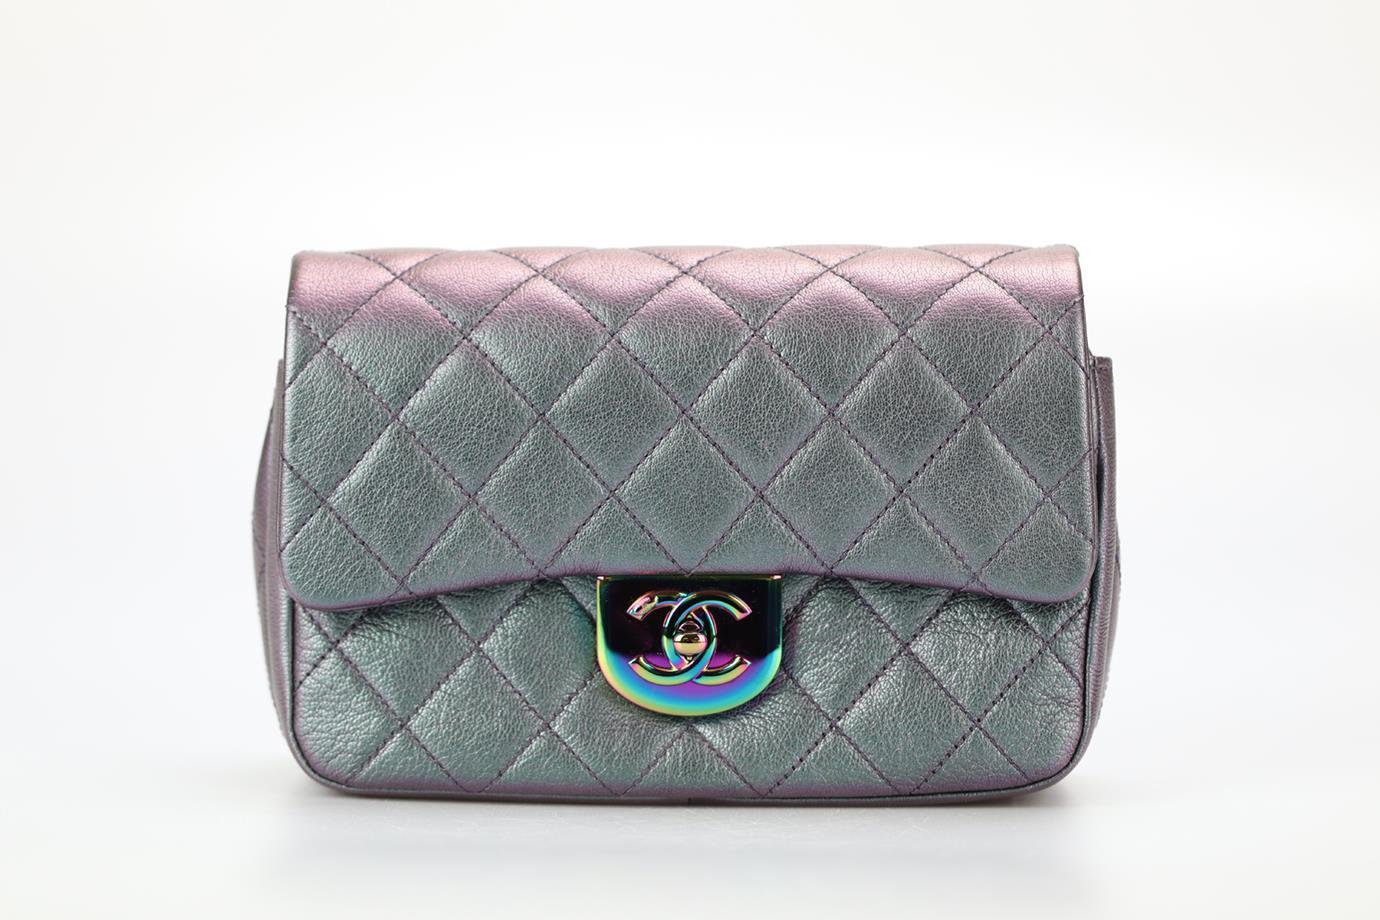 Chanel 2016 Double Carry Waist Chain Flap Small Irisdescent Quilted Leather Crossbody Bag. Green and purple. Twist lock fastening - Front. Comes with - authenticity card and dustbag. Height: 5.8 in. Width: 9 in. Depth: 3 in. Strap drop: 20 in.